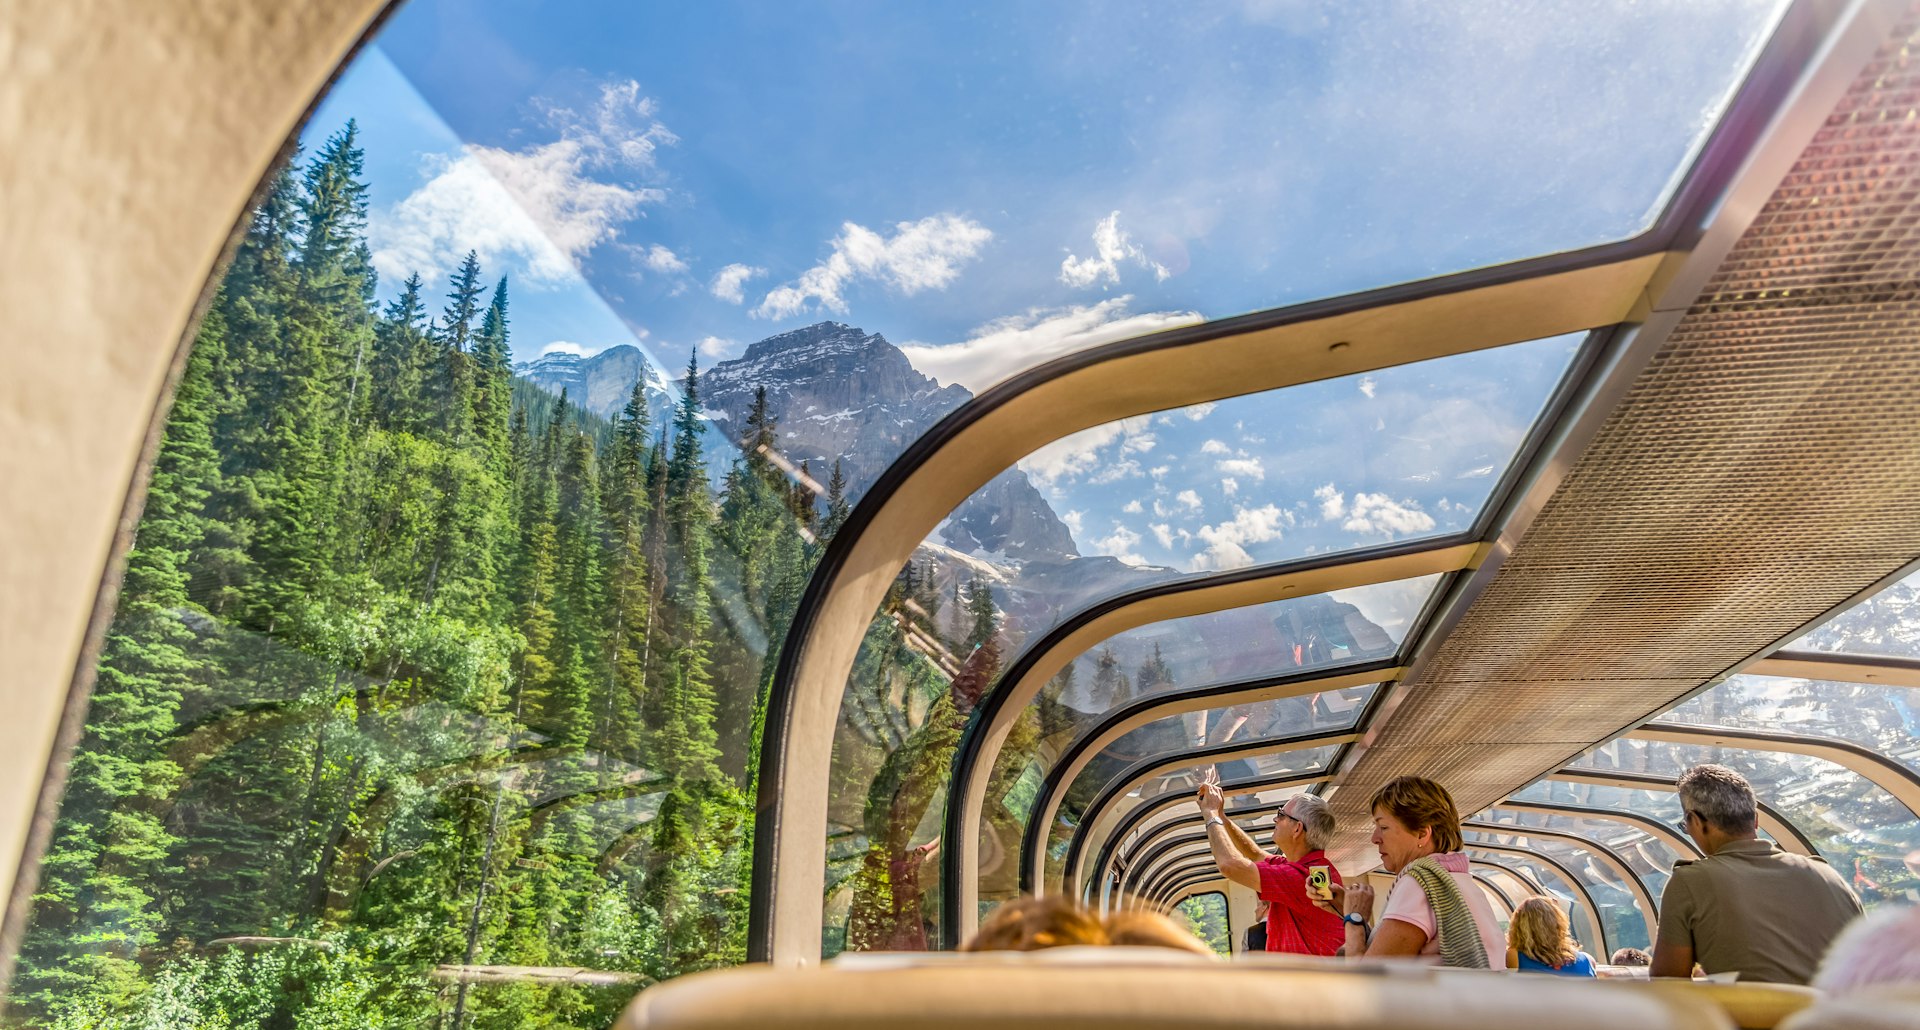 The glass-ceilinged roof of the Rocky Mountaineer train carriage